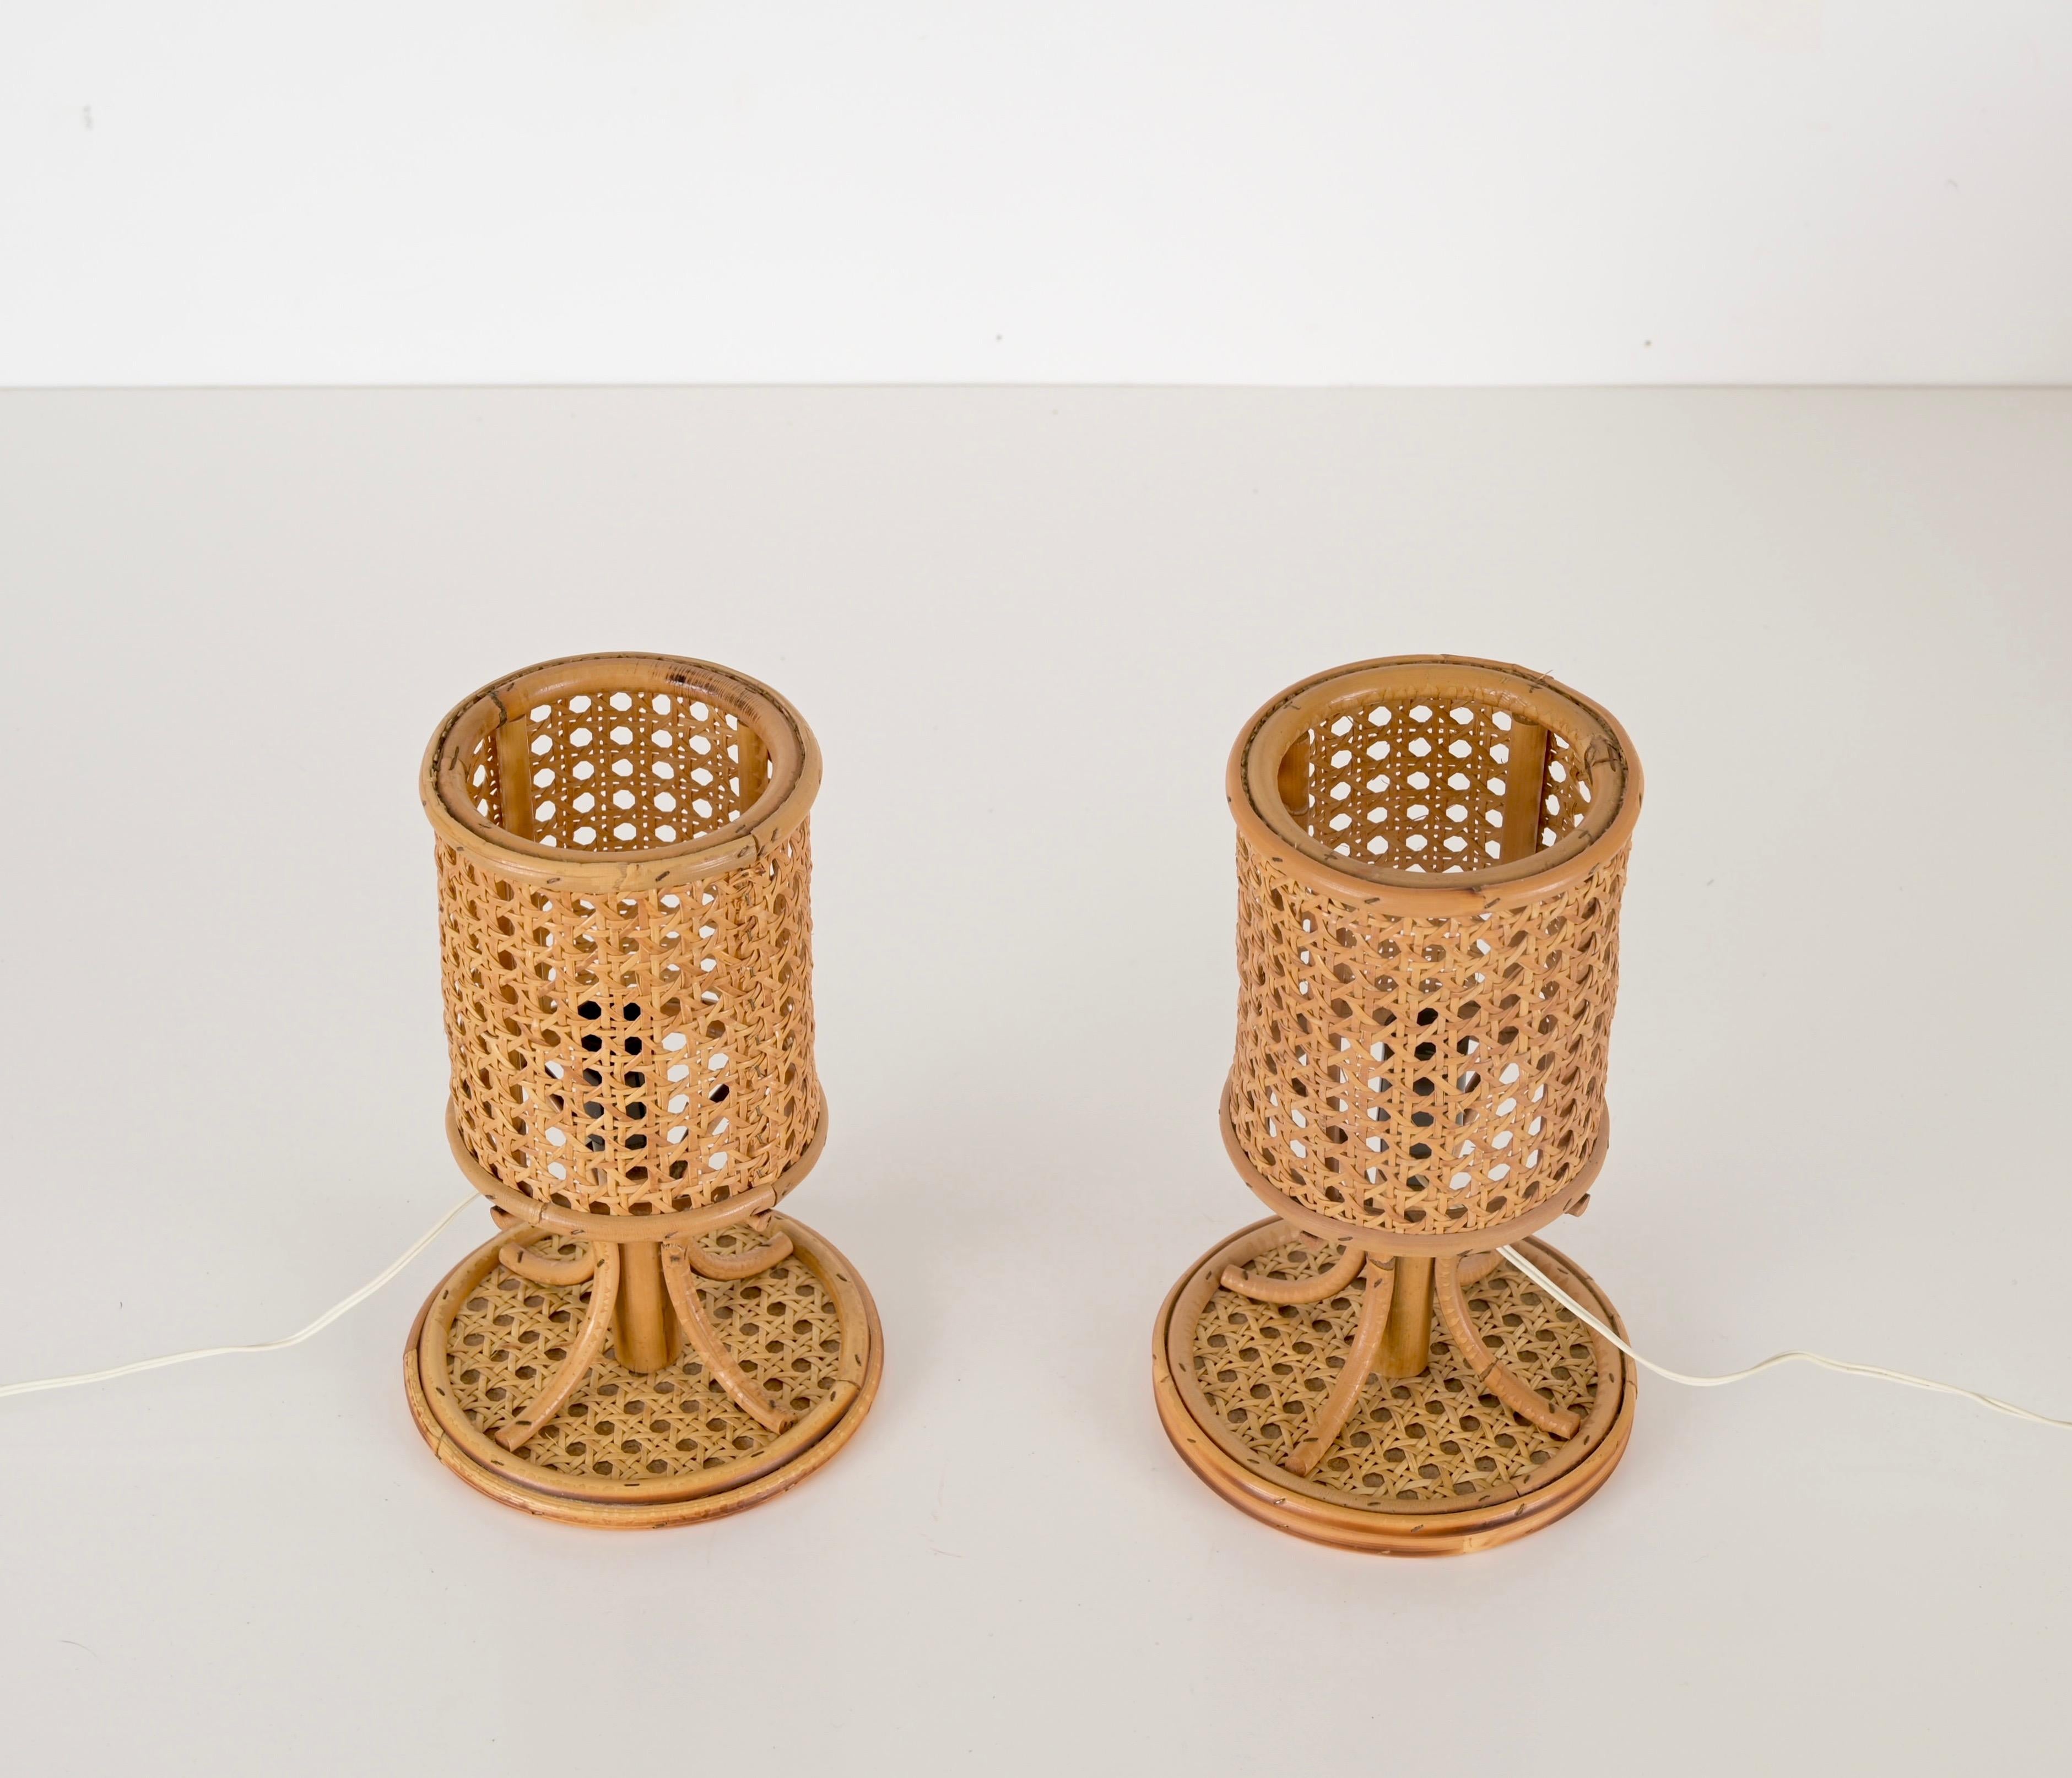 French Louis Sognot Pair of Table Lamps in Rattan and Wicker, France 1960s For Sale